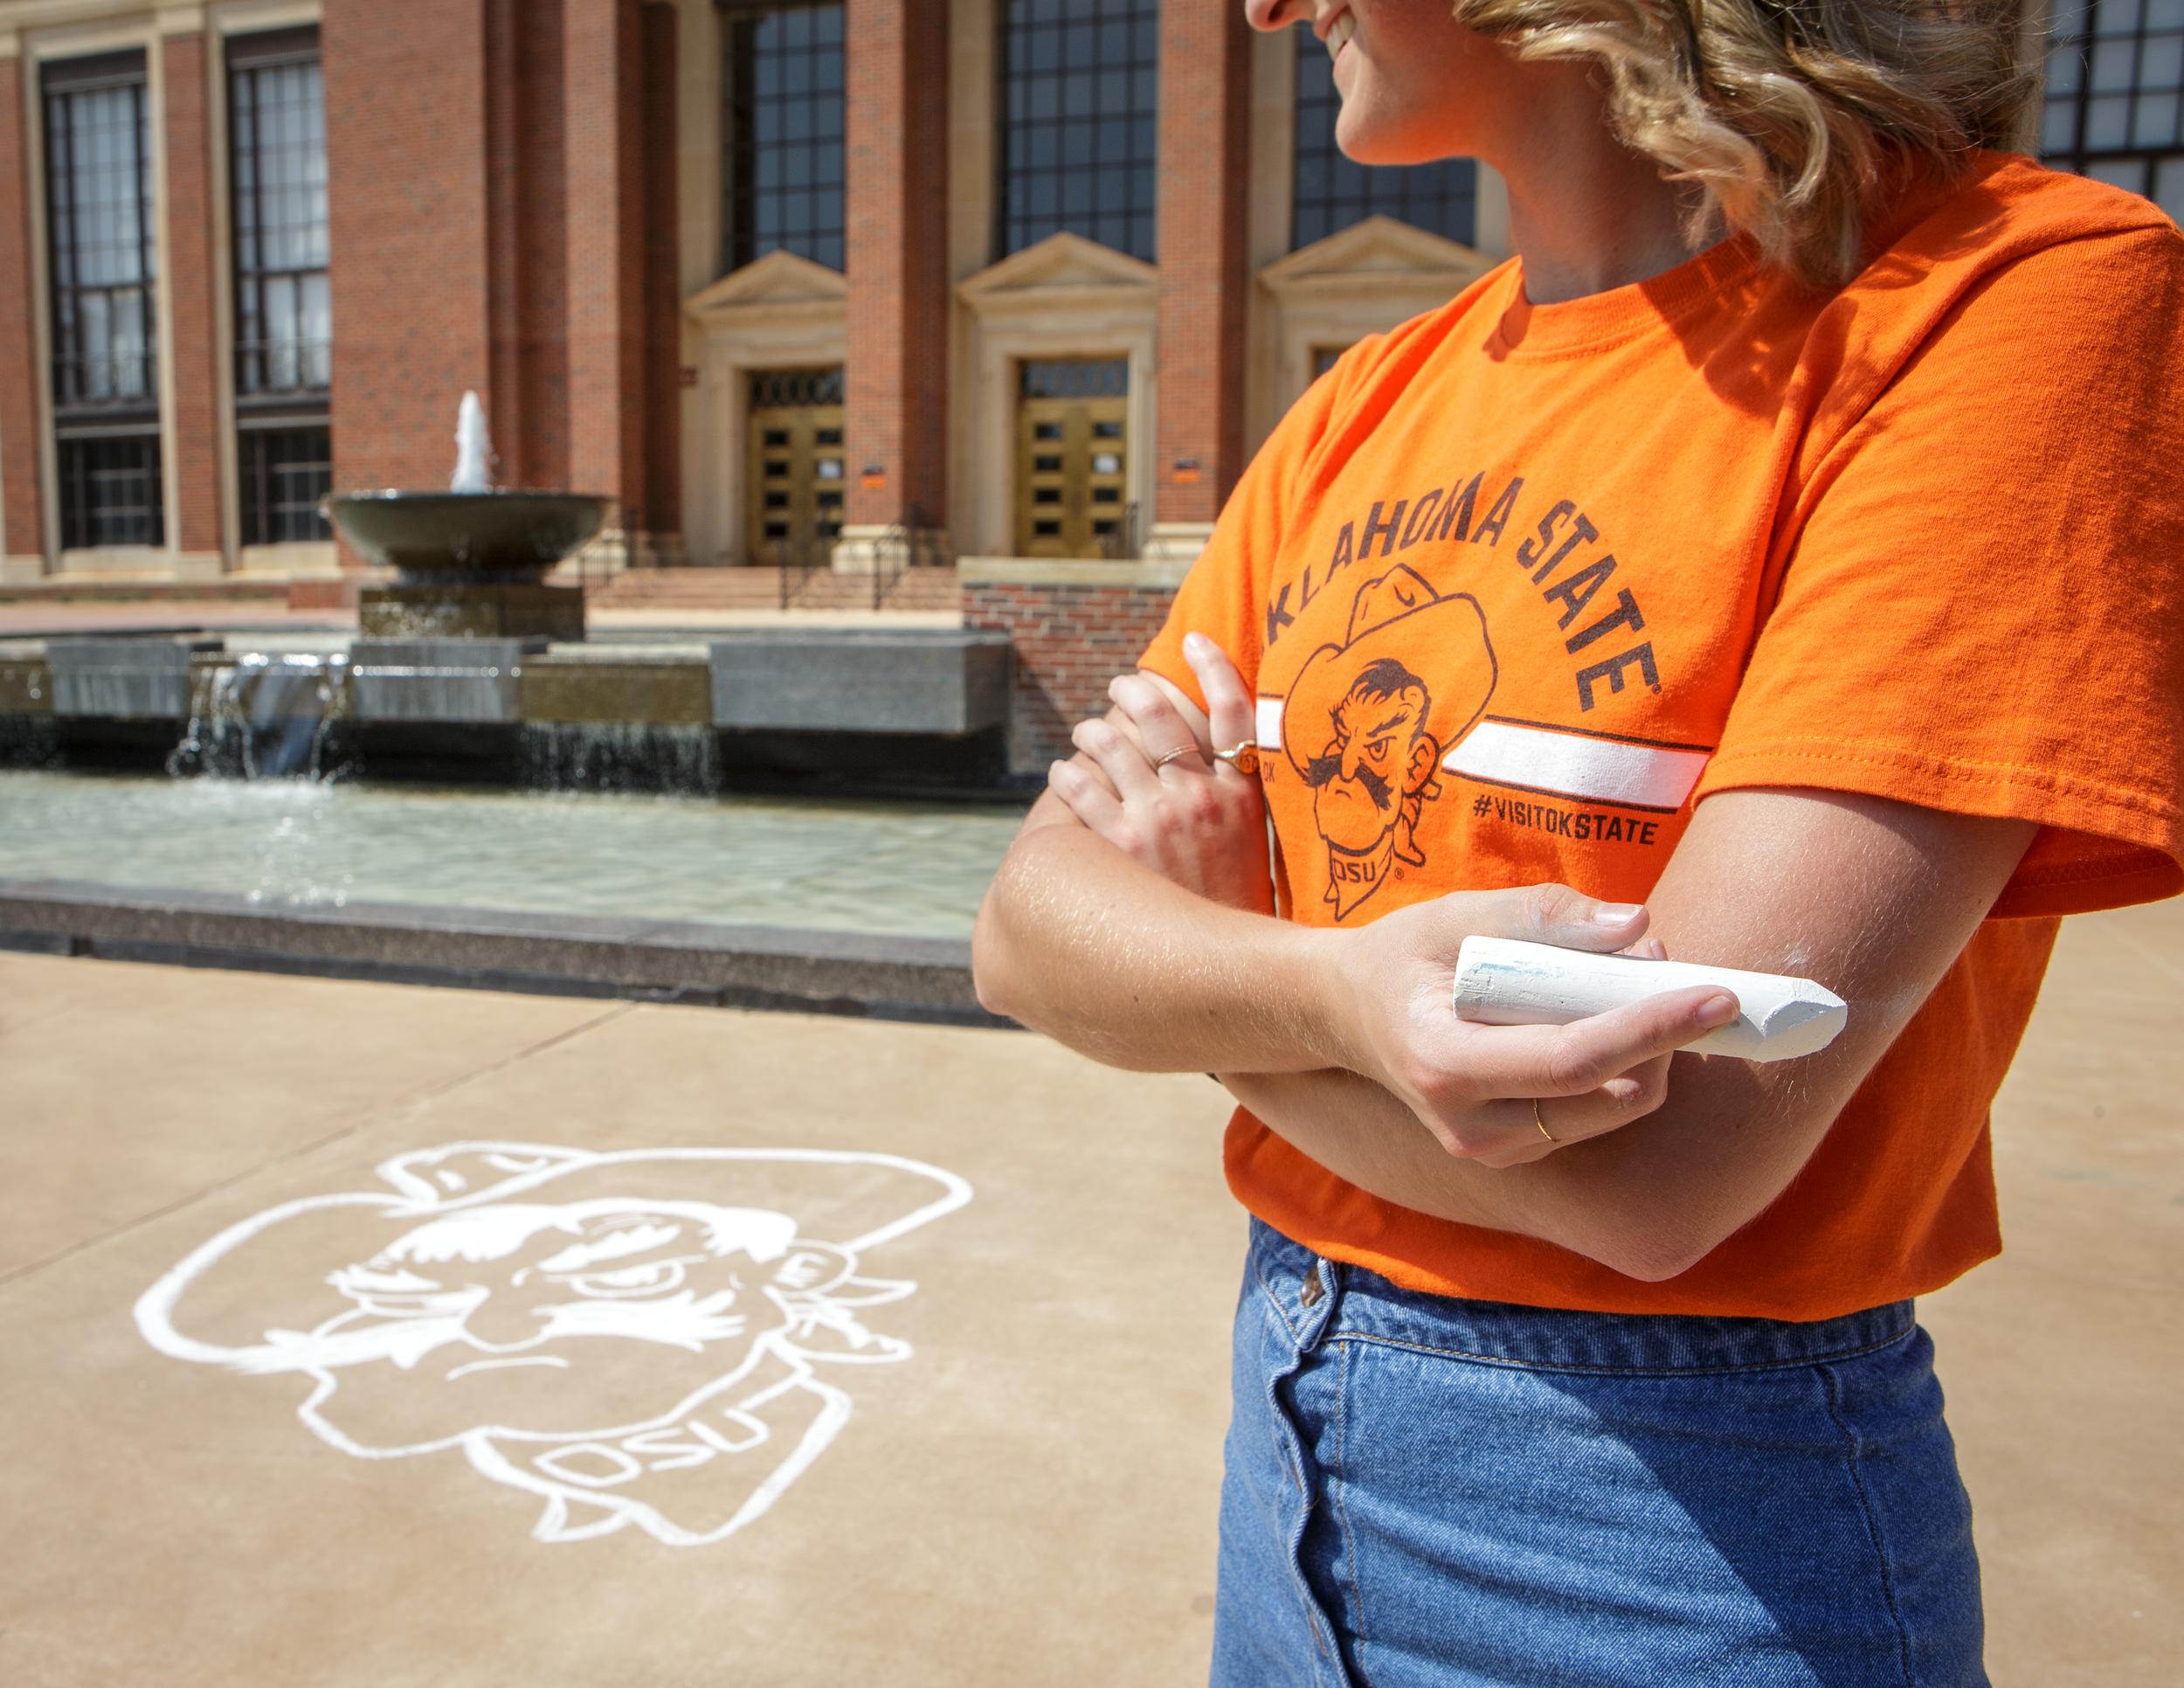 A young woman crosses her arms while holding a large piece of sidewalk chalk with a chalk drawing of Pistol Pete's face on the concrete behind her in front of Edmon Low Library and the fountain.